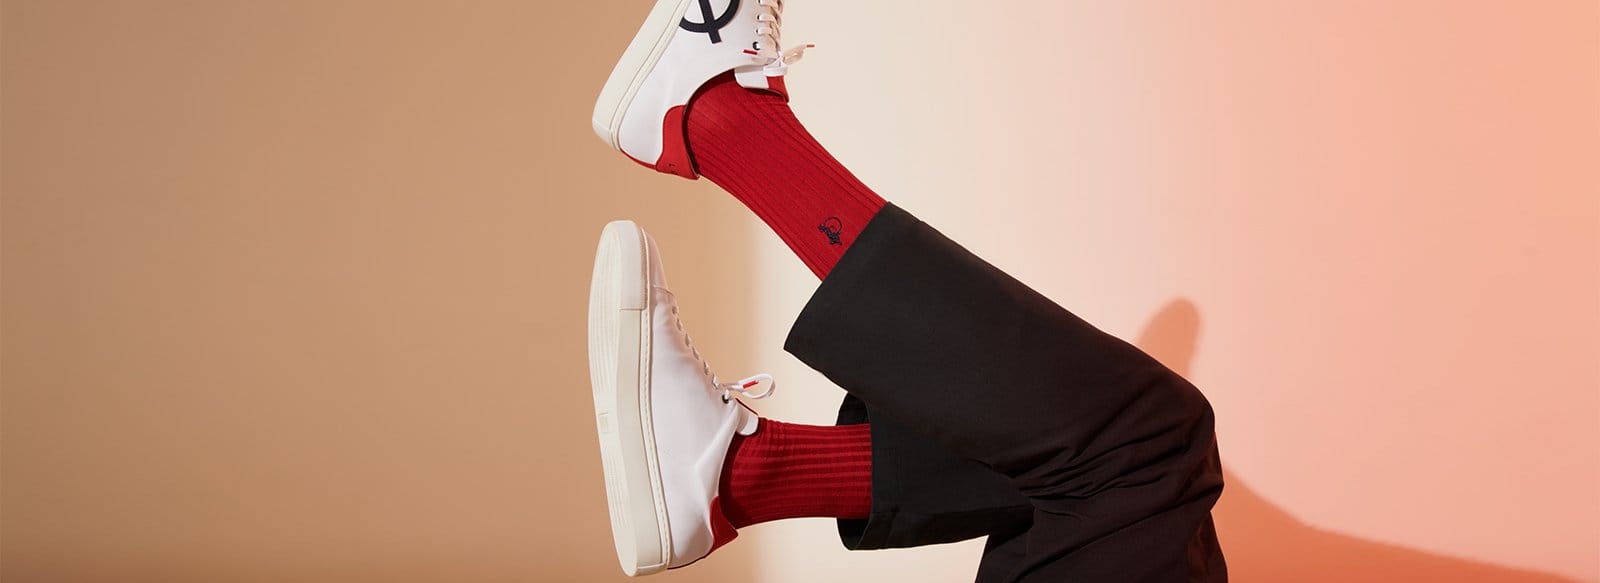 Men’s Style Tip: How to wear red socks